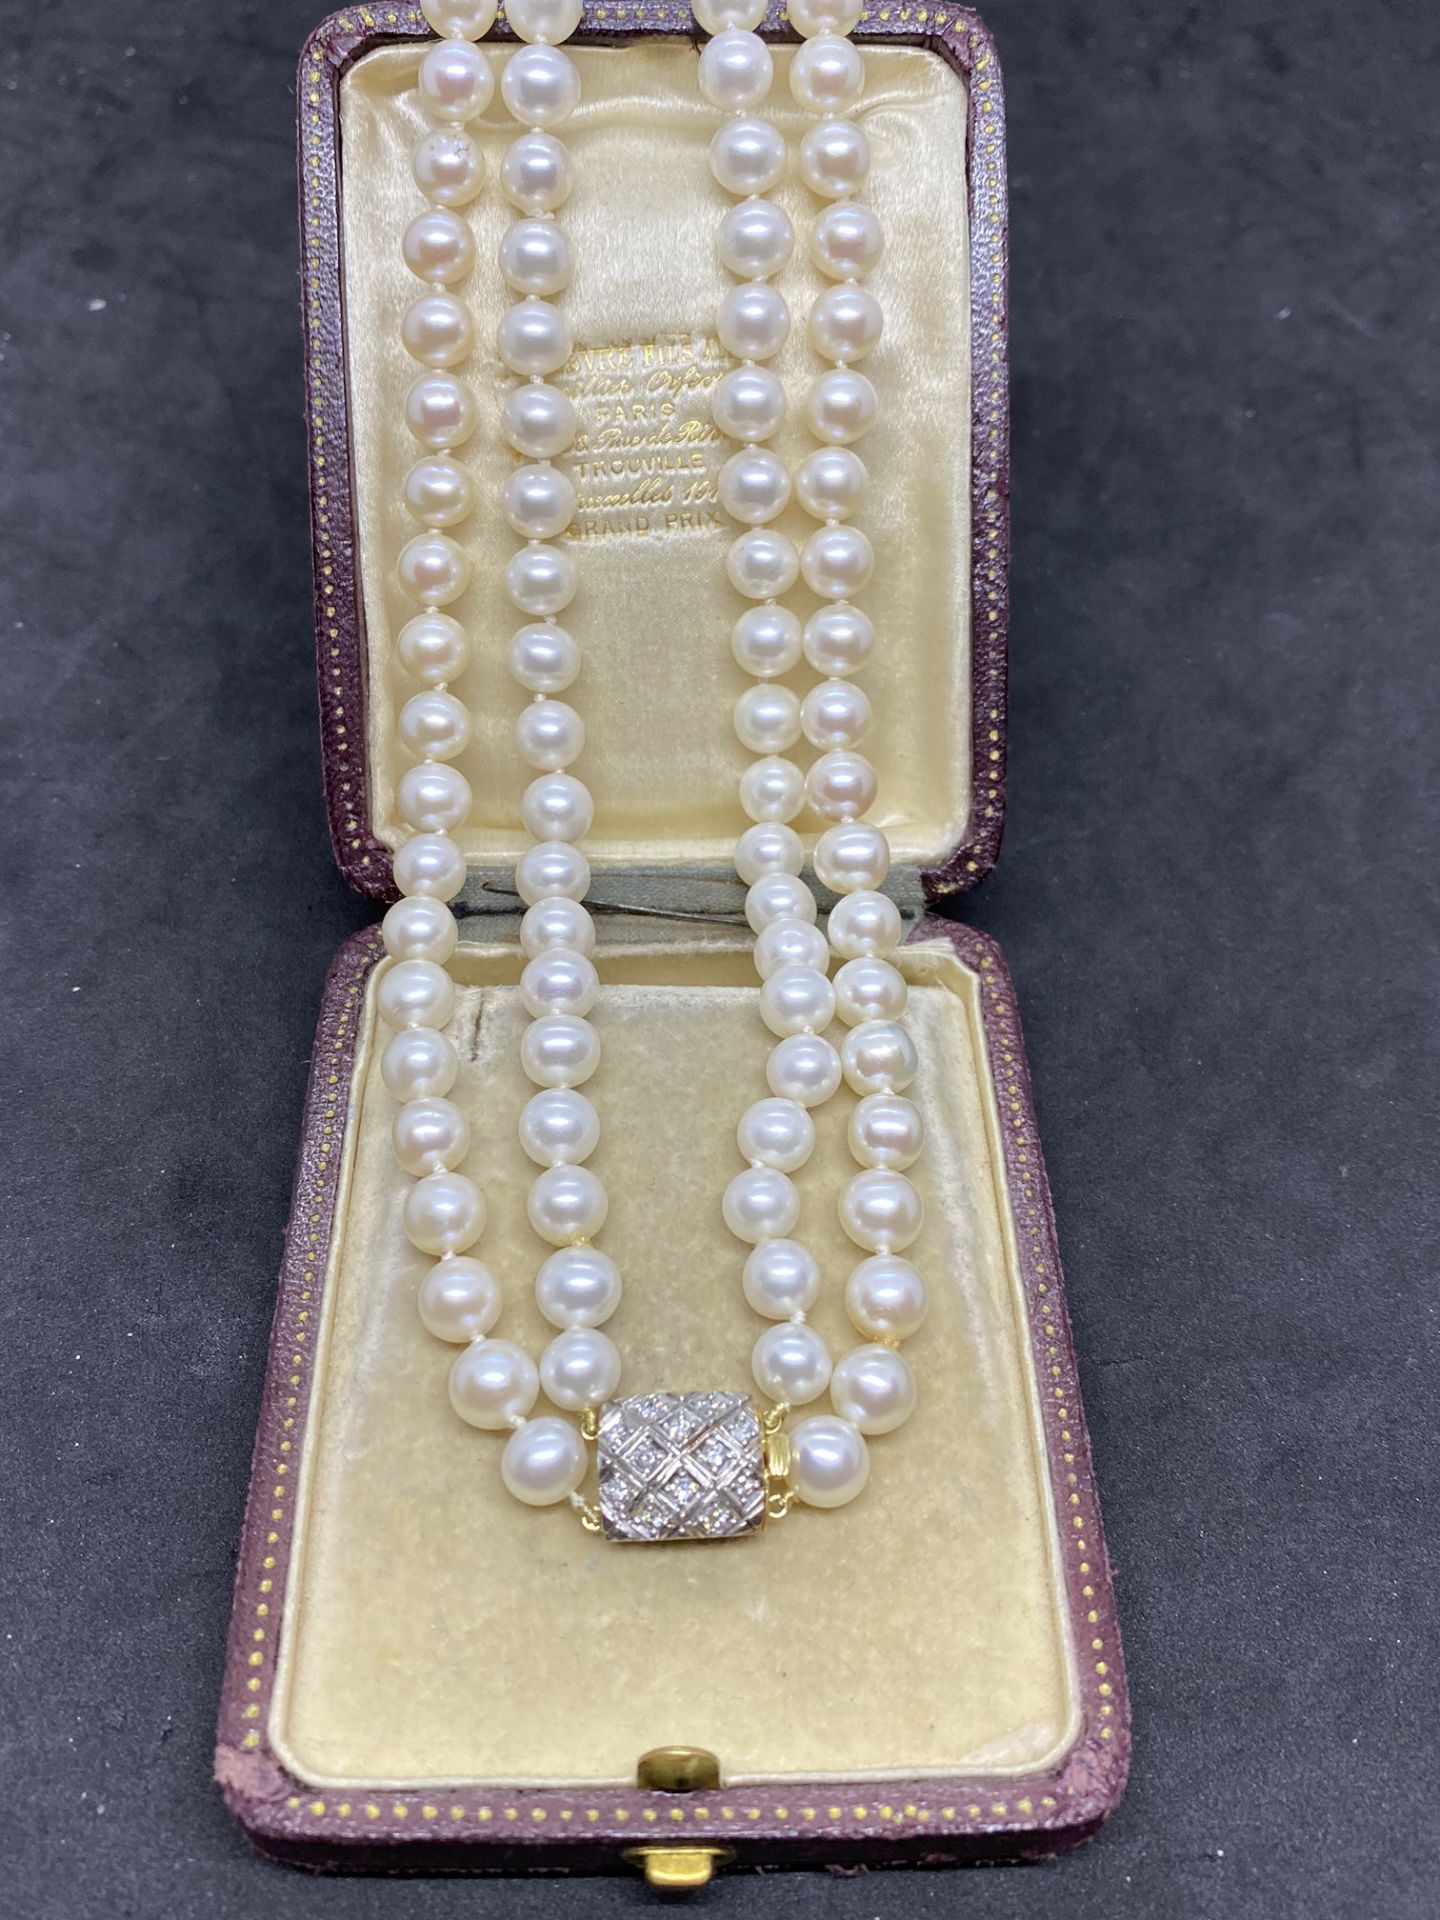 CULTURED PEARL NECKLACE WITH 18ct GOLD CLASP - Image 3 of 6